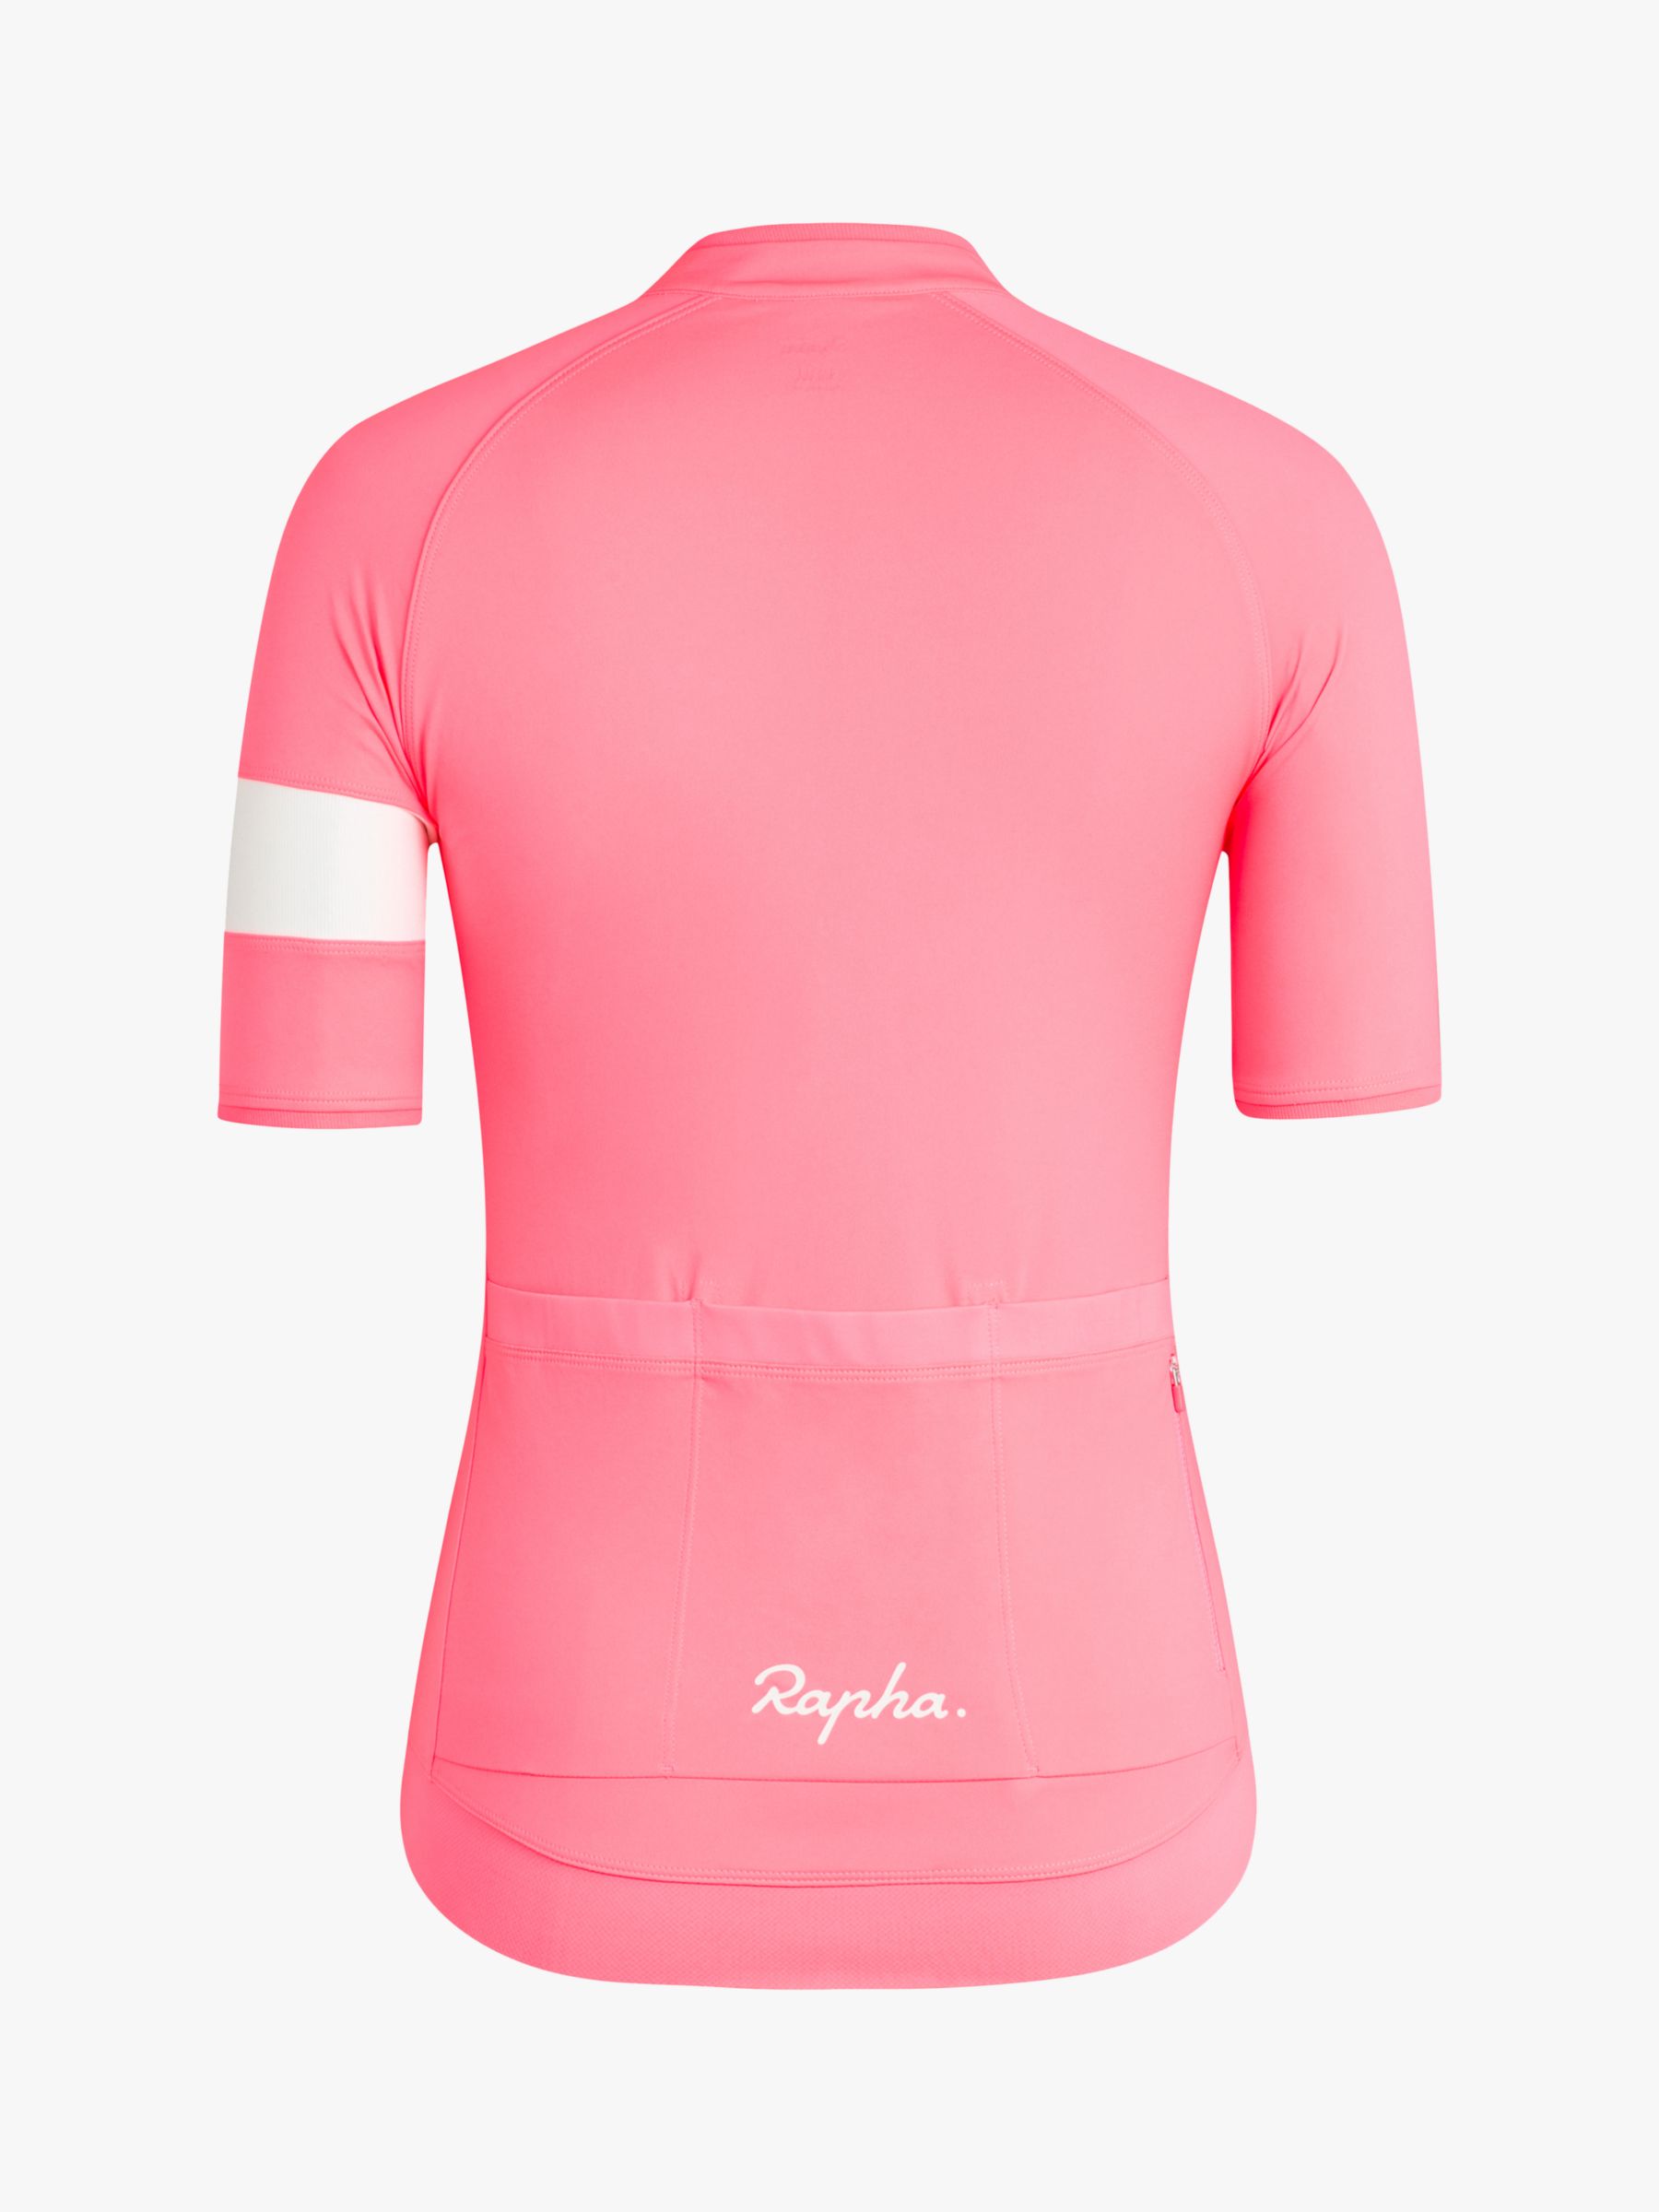 Rapha Core Jersey Short Sleeve Cycling Top, High-vis Pink, S